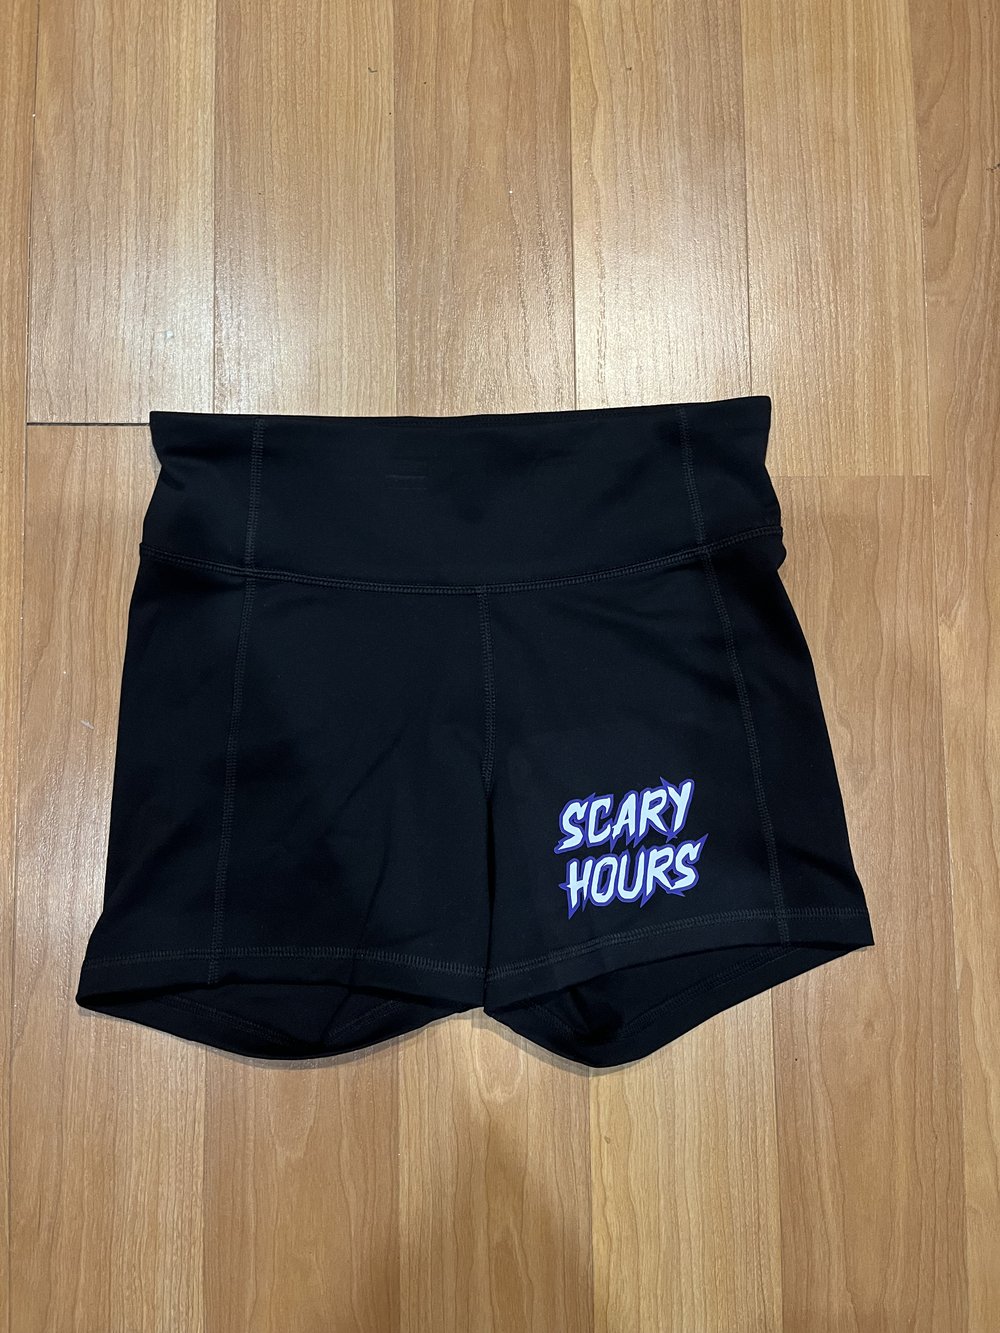 Ladies Power Waist Compression Shorts (Black) — Scary Hours